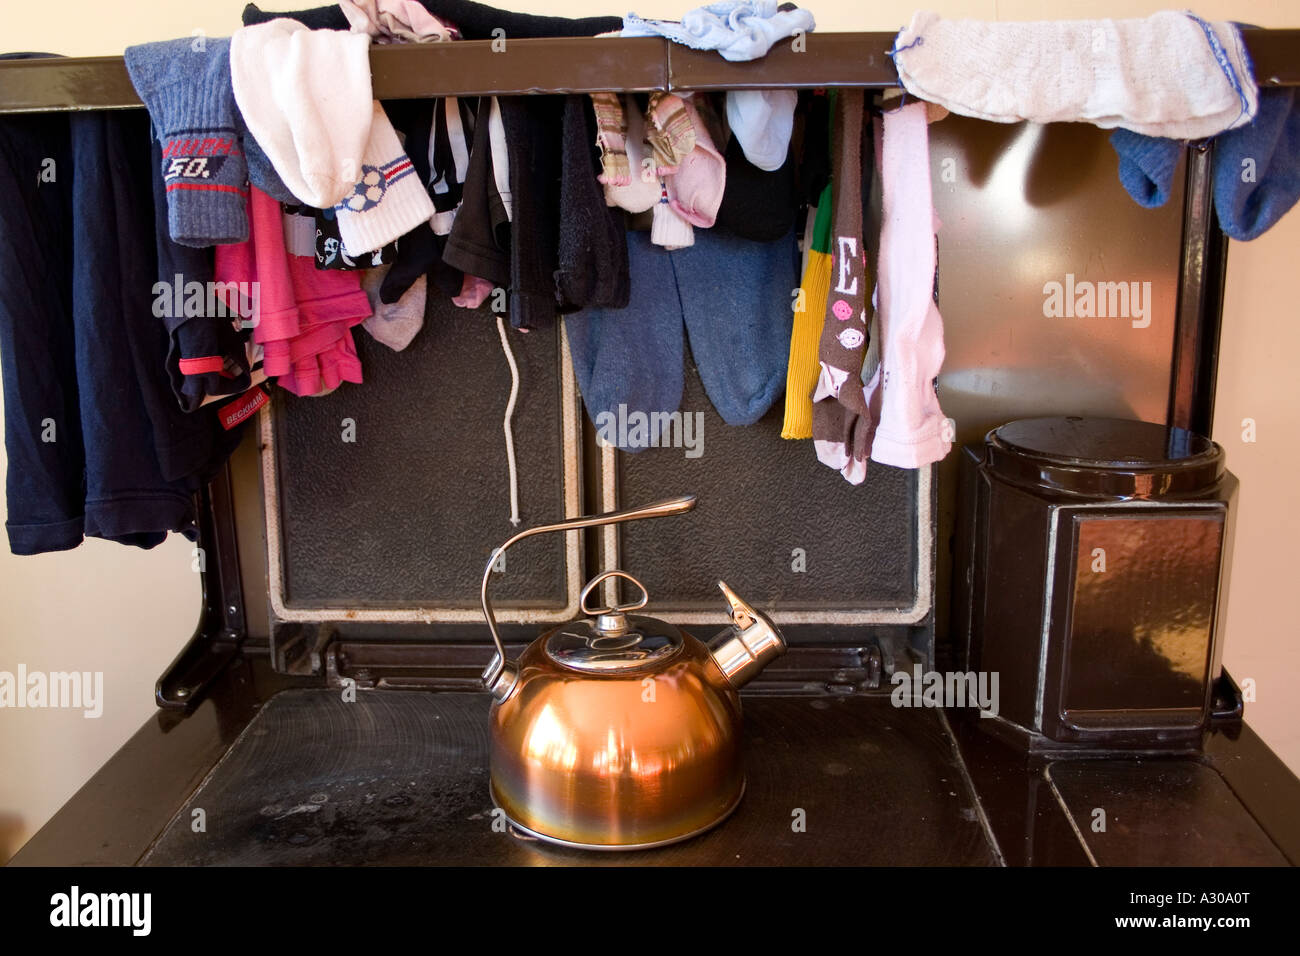 https://c8.alamy.com/comp/A30A0T/copper-kettle-on-stove-in-irish-house-A30A0T.jpg